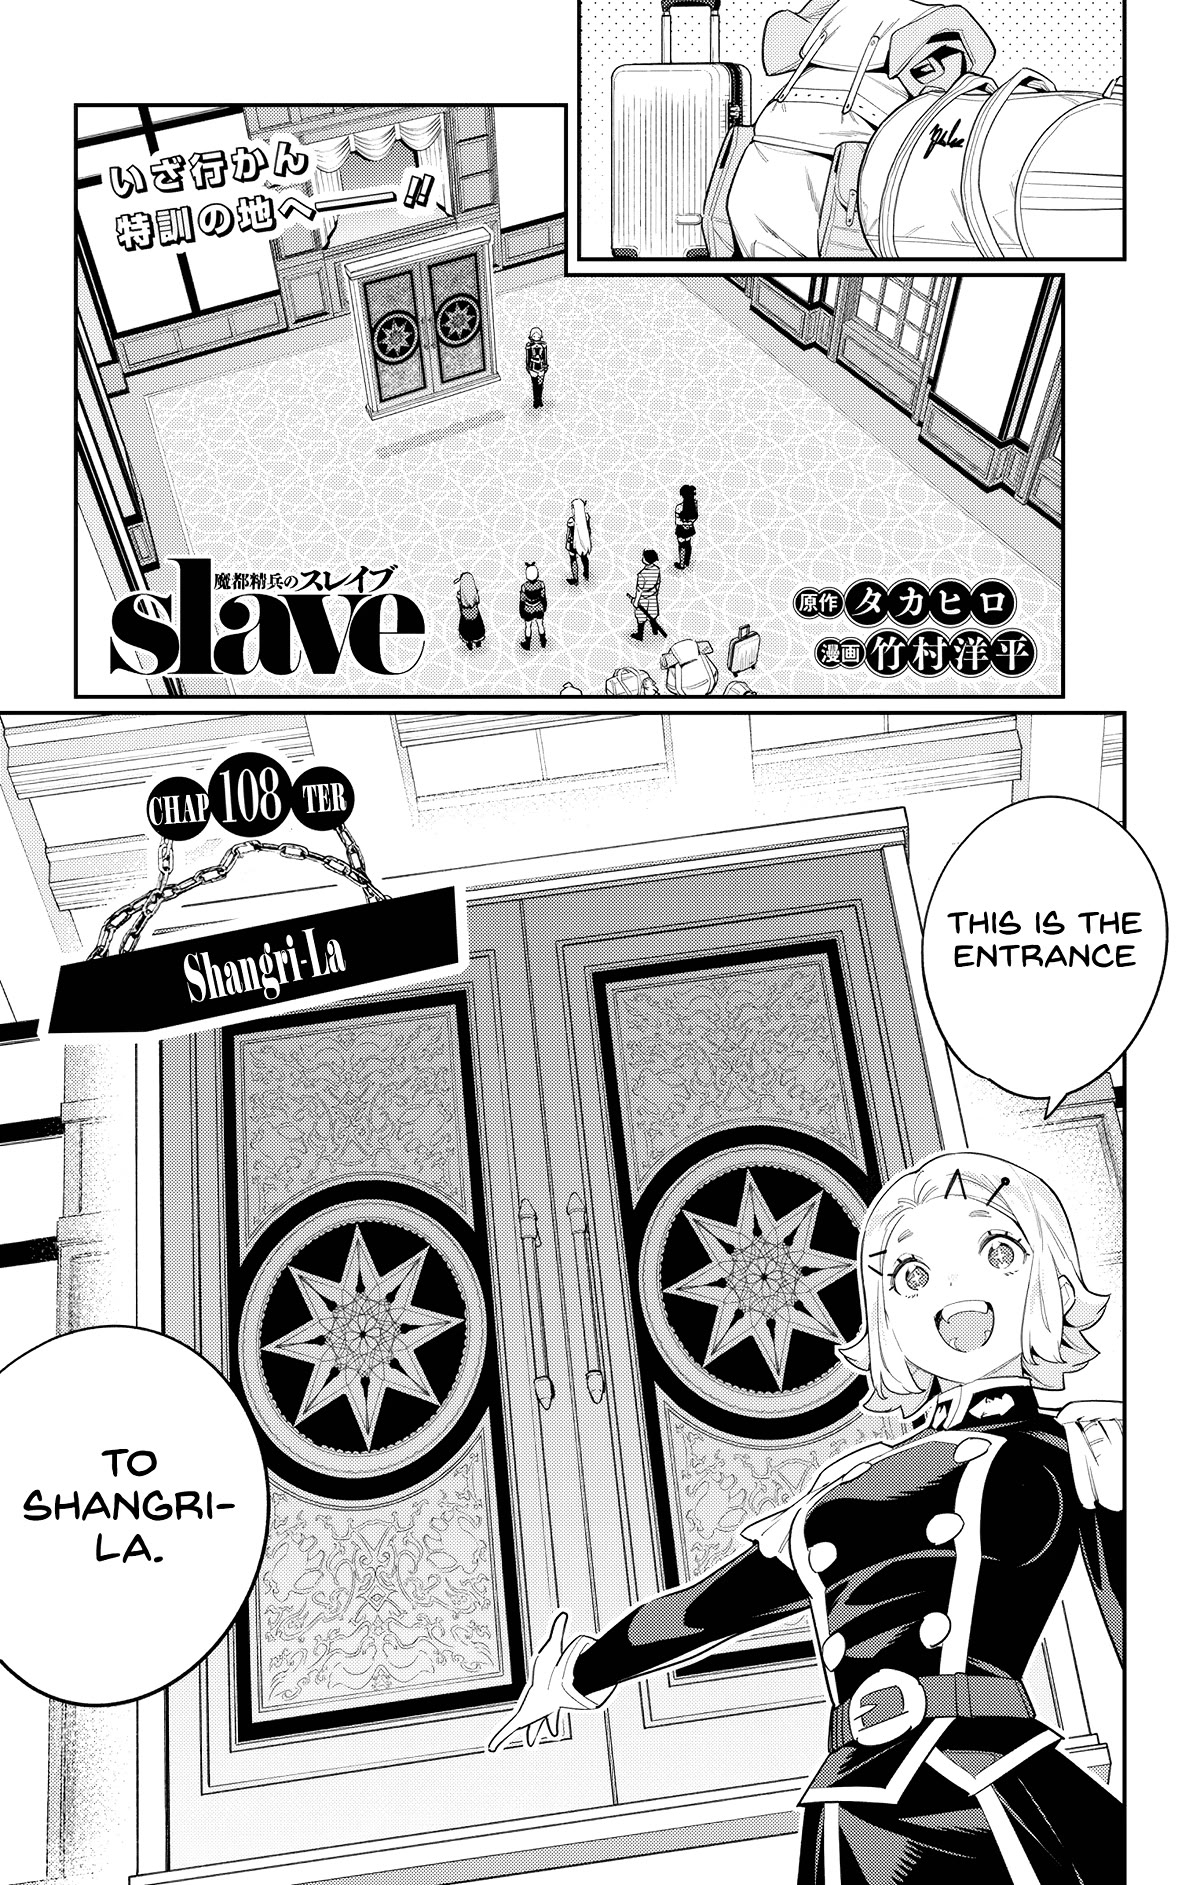 Slave Of The Magic Capital's Elite Troops Chapter 108: Shangri-La - Picture 1